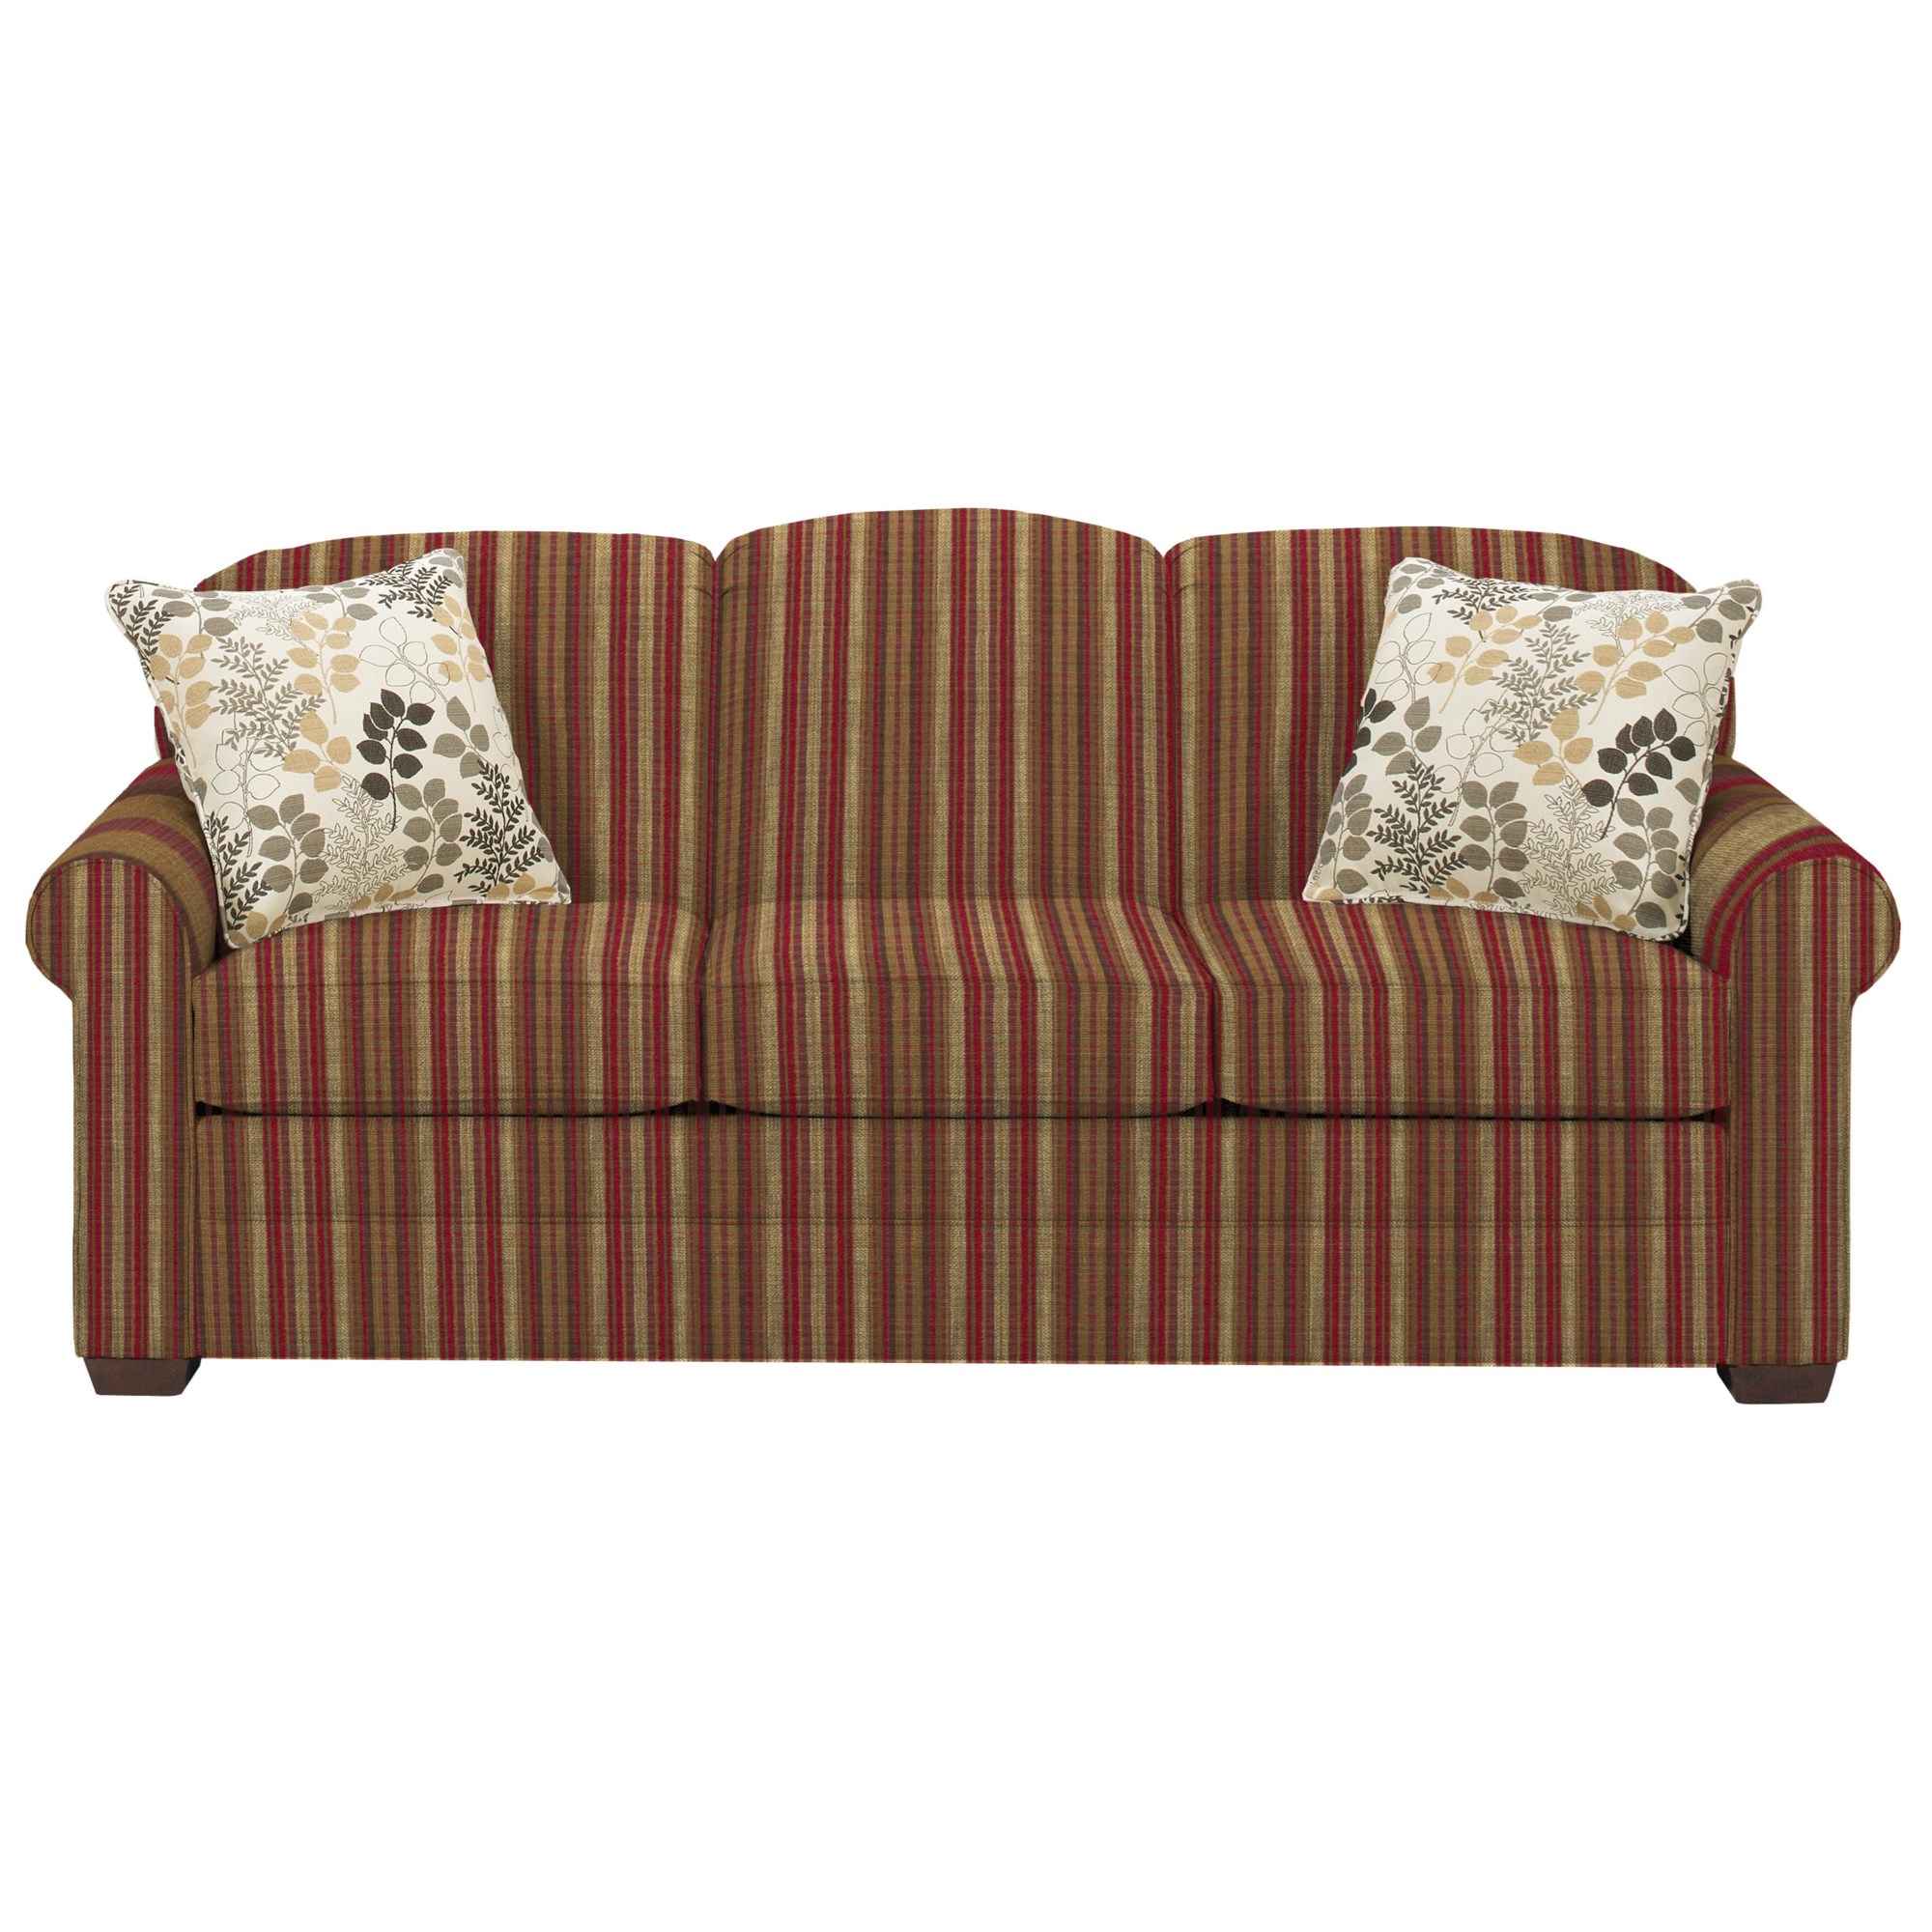 Craftmaster Living Room Sofa 917454BD (Sleeper also available